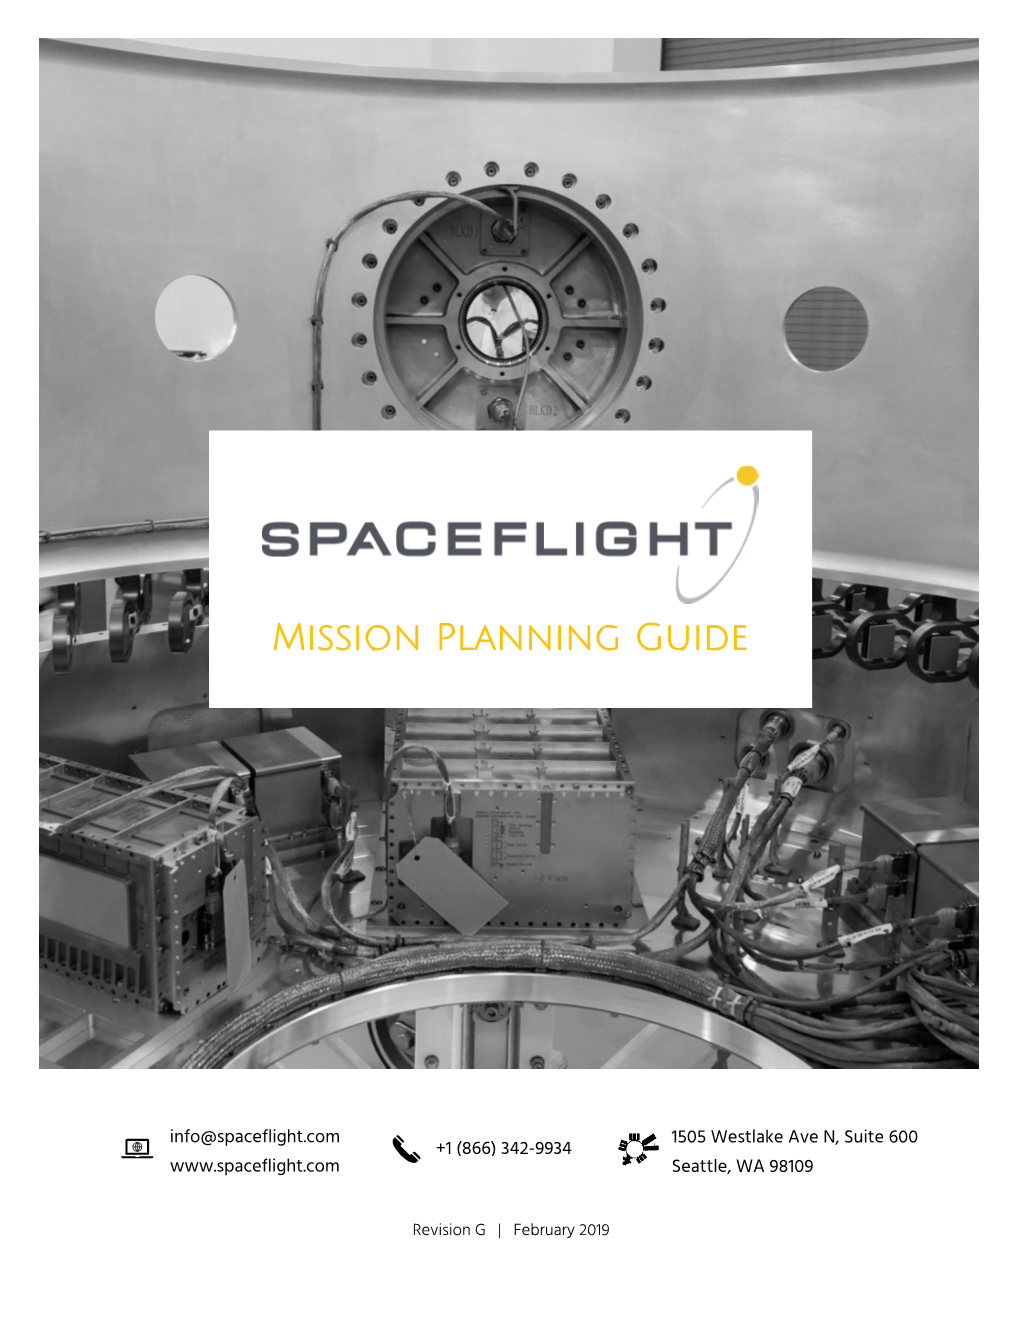 Spaceflight Mission Planning Guide